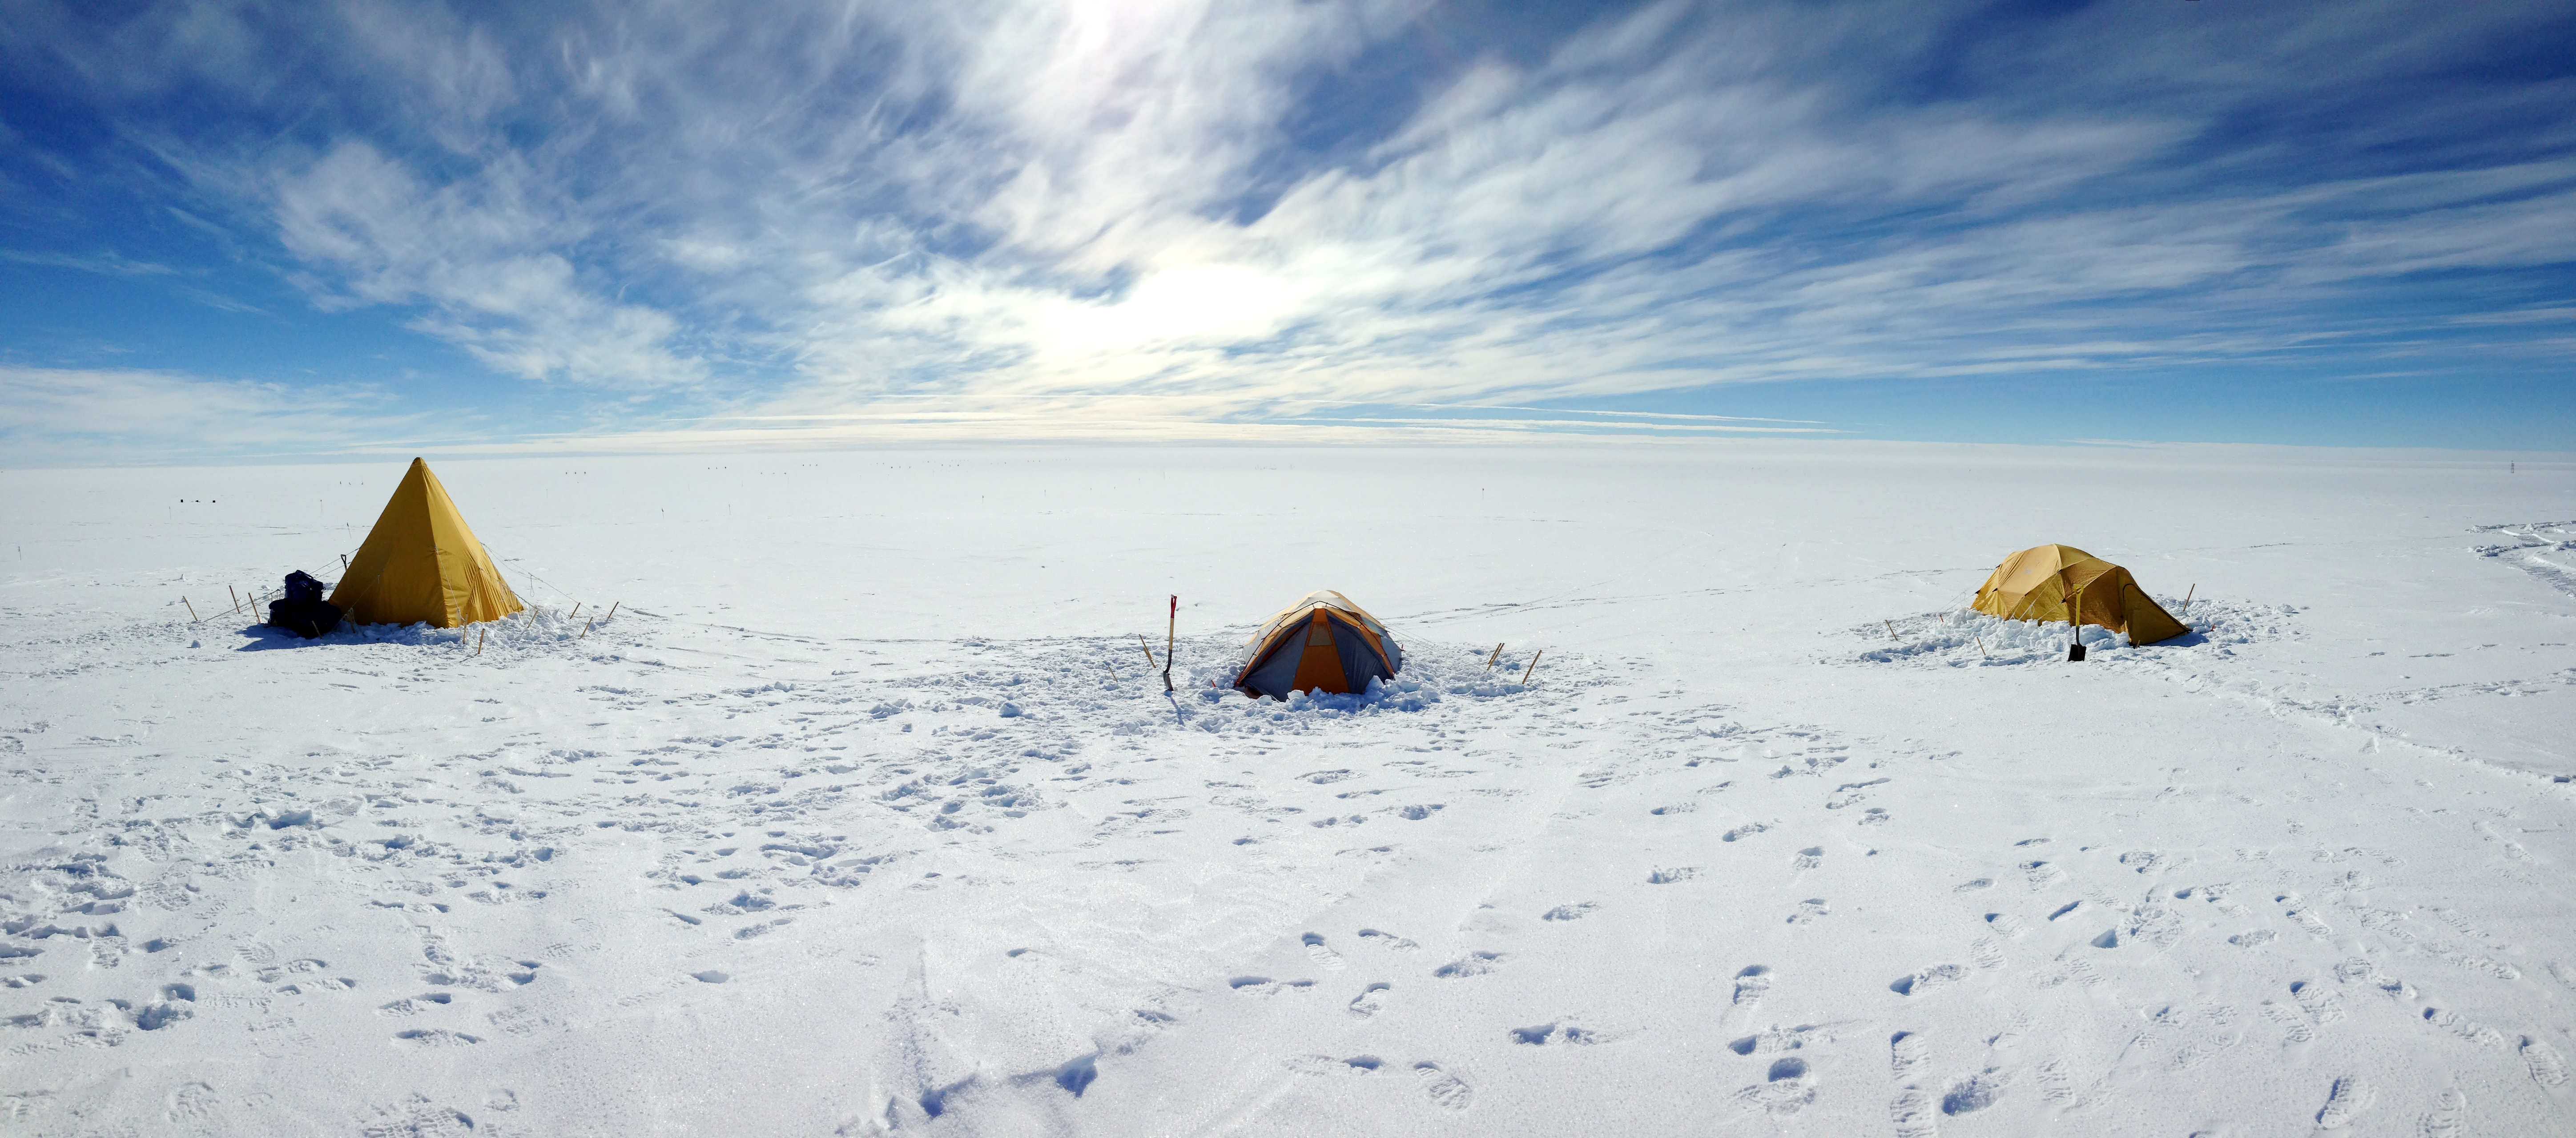 Tents are set up on the polar plateau.